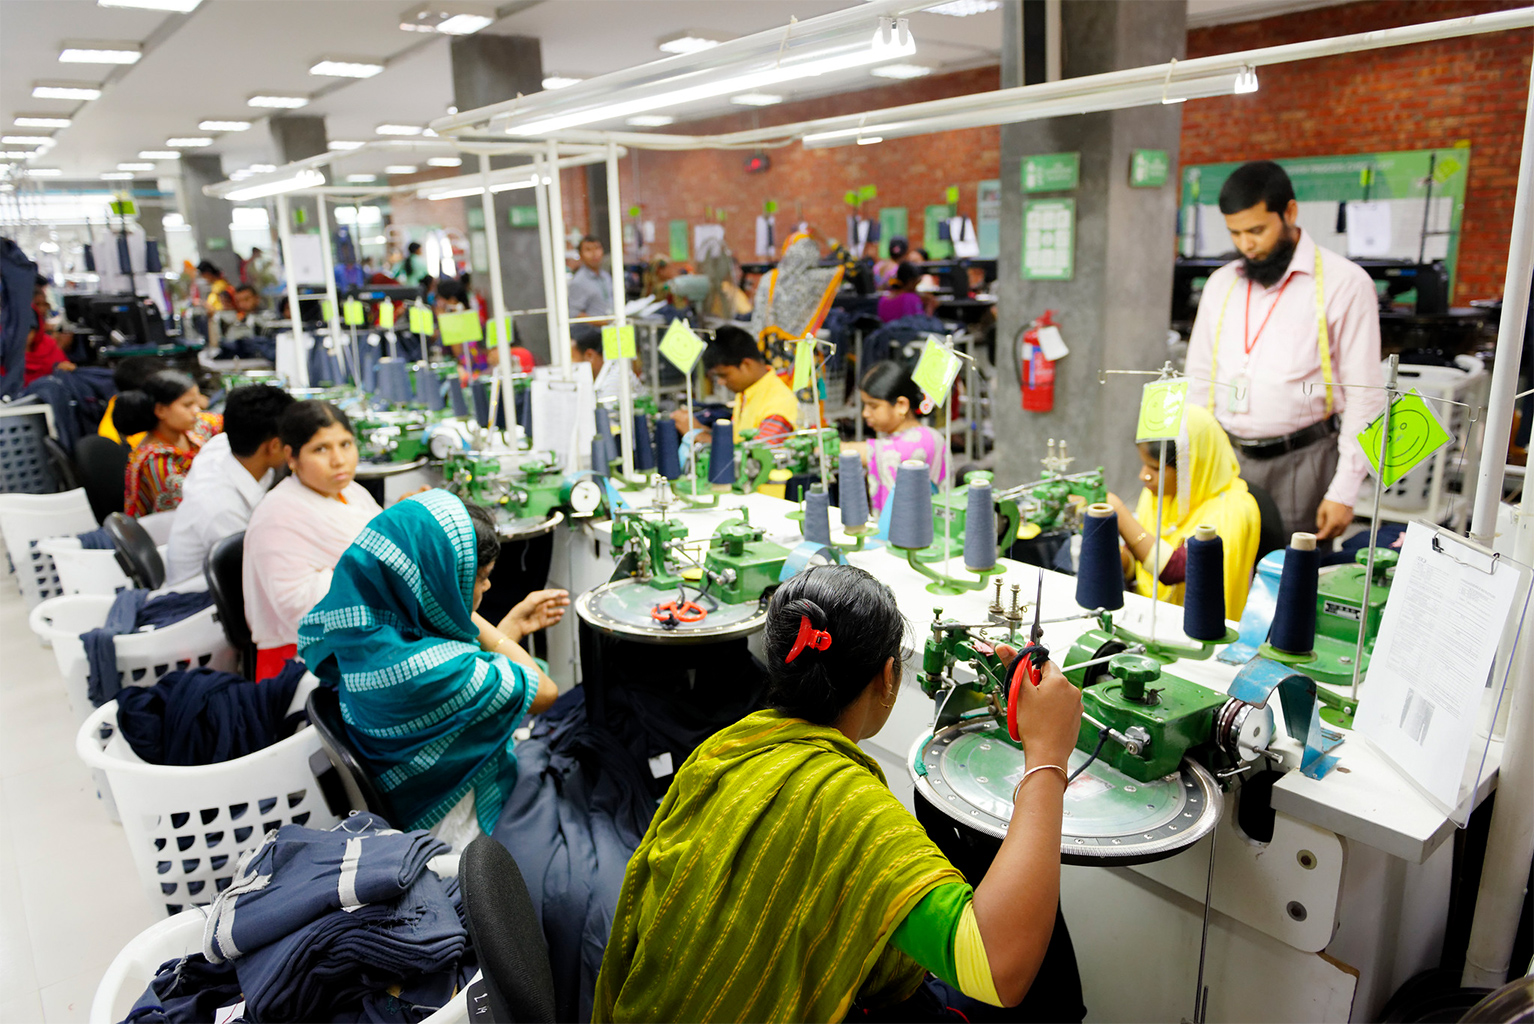 Workers and supervisors are seen working side by side in one of Bangladesh's exporting garment factories. 's exporting garment factories. 